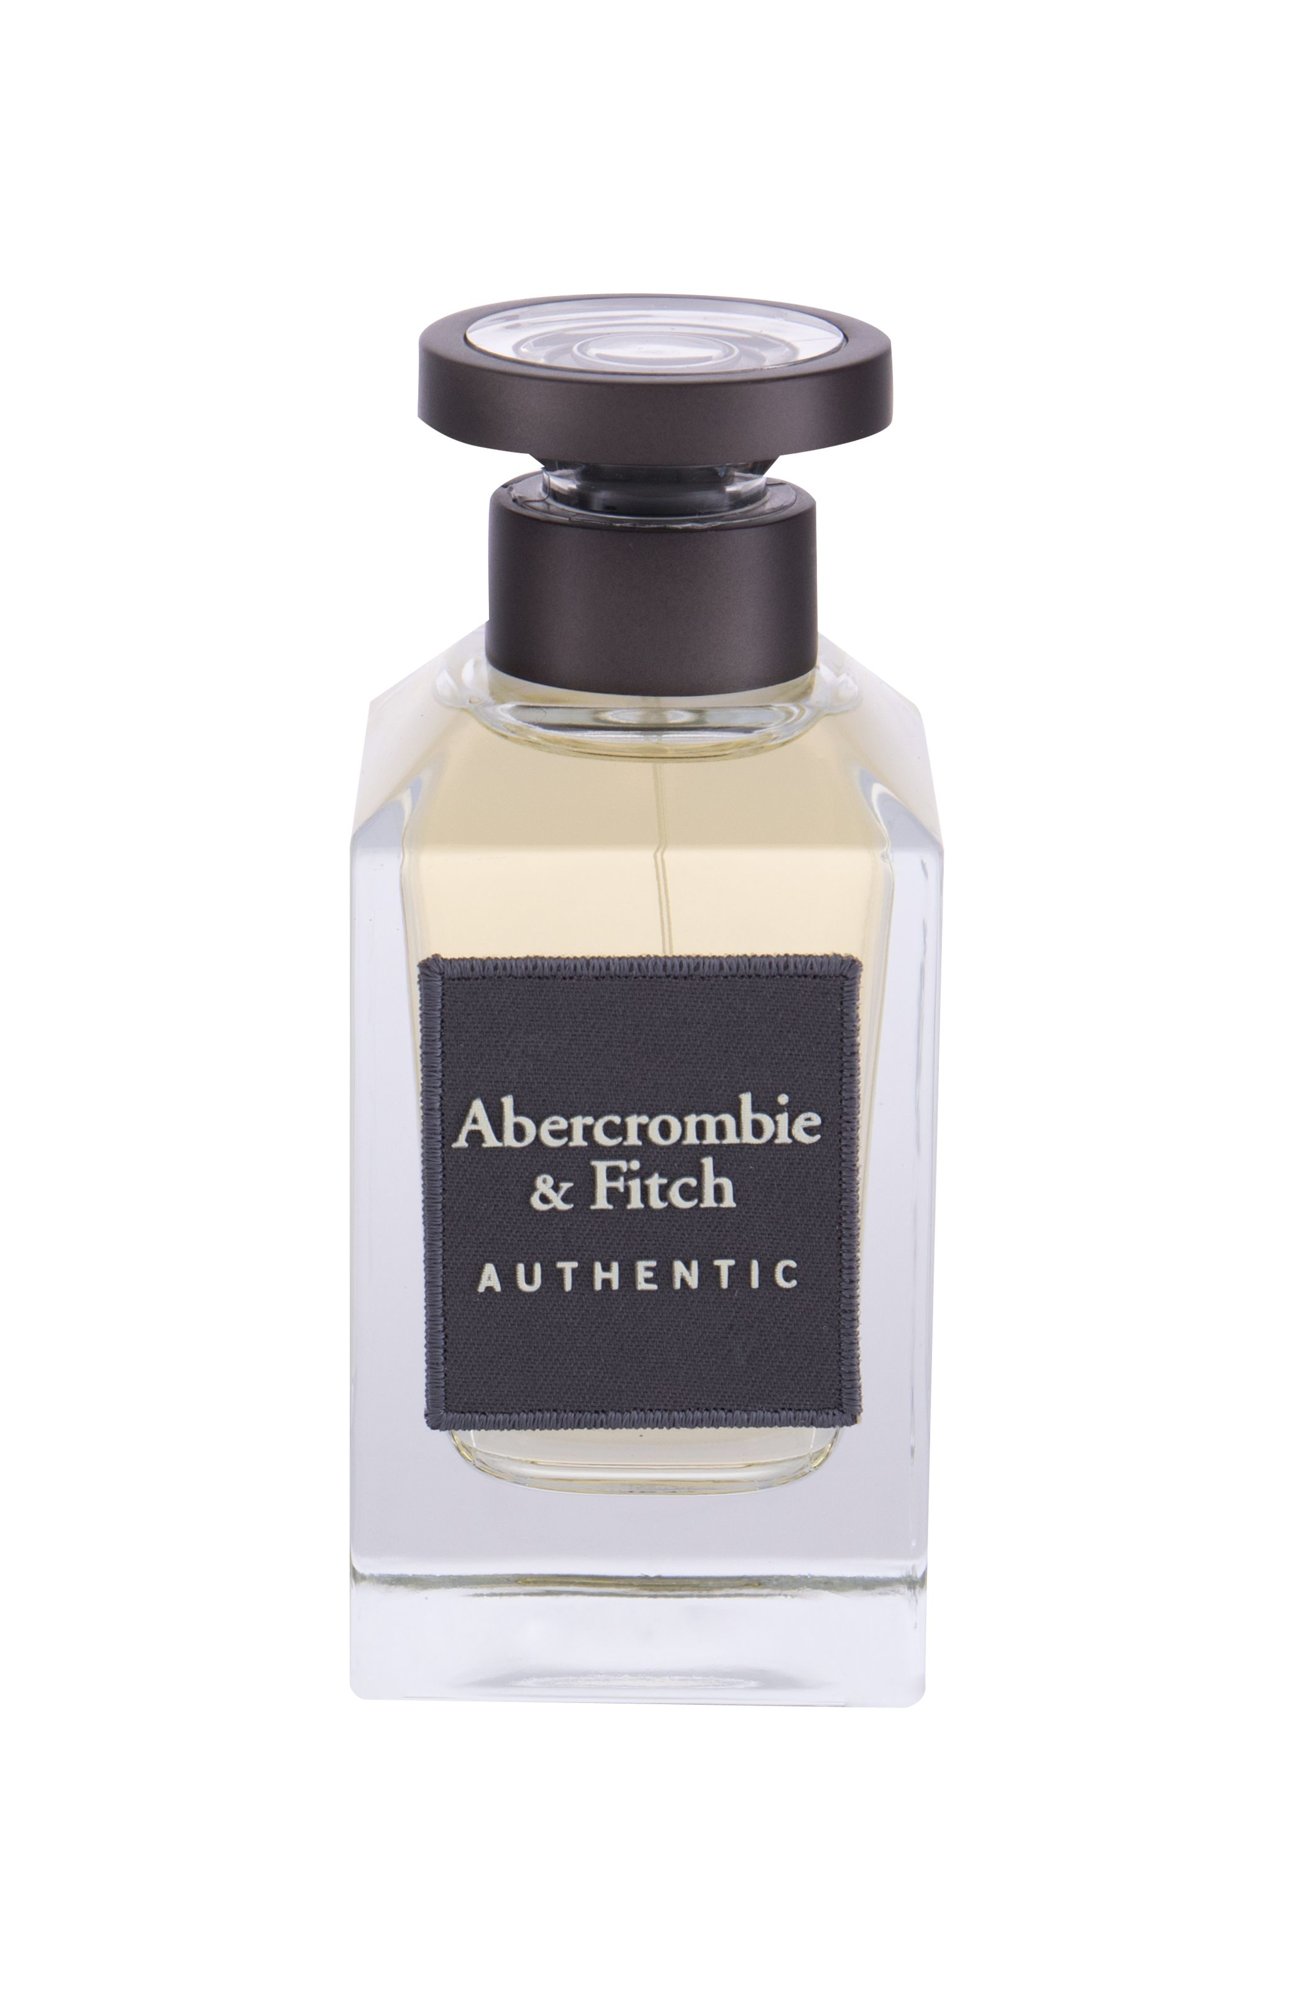 Abercrombie & Fitch Authentic, edt 100ml